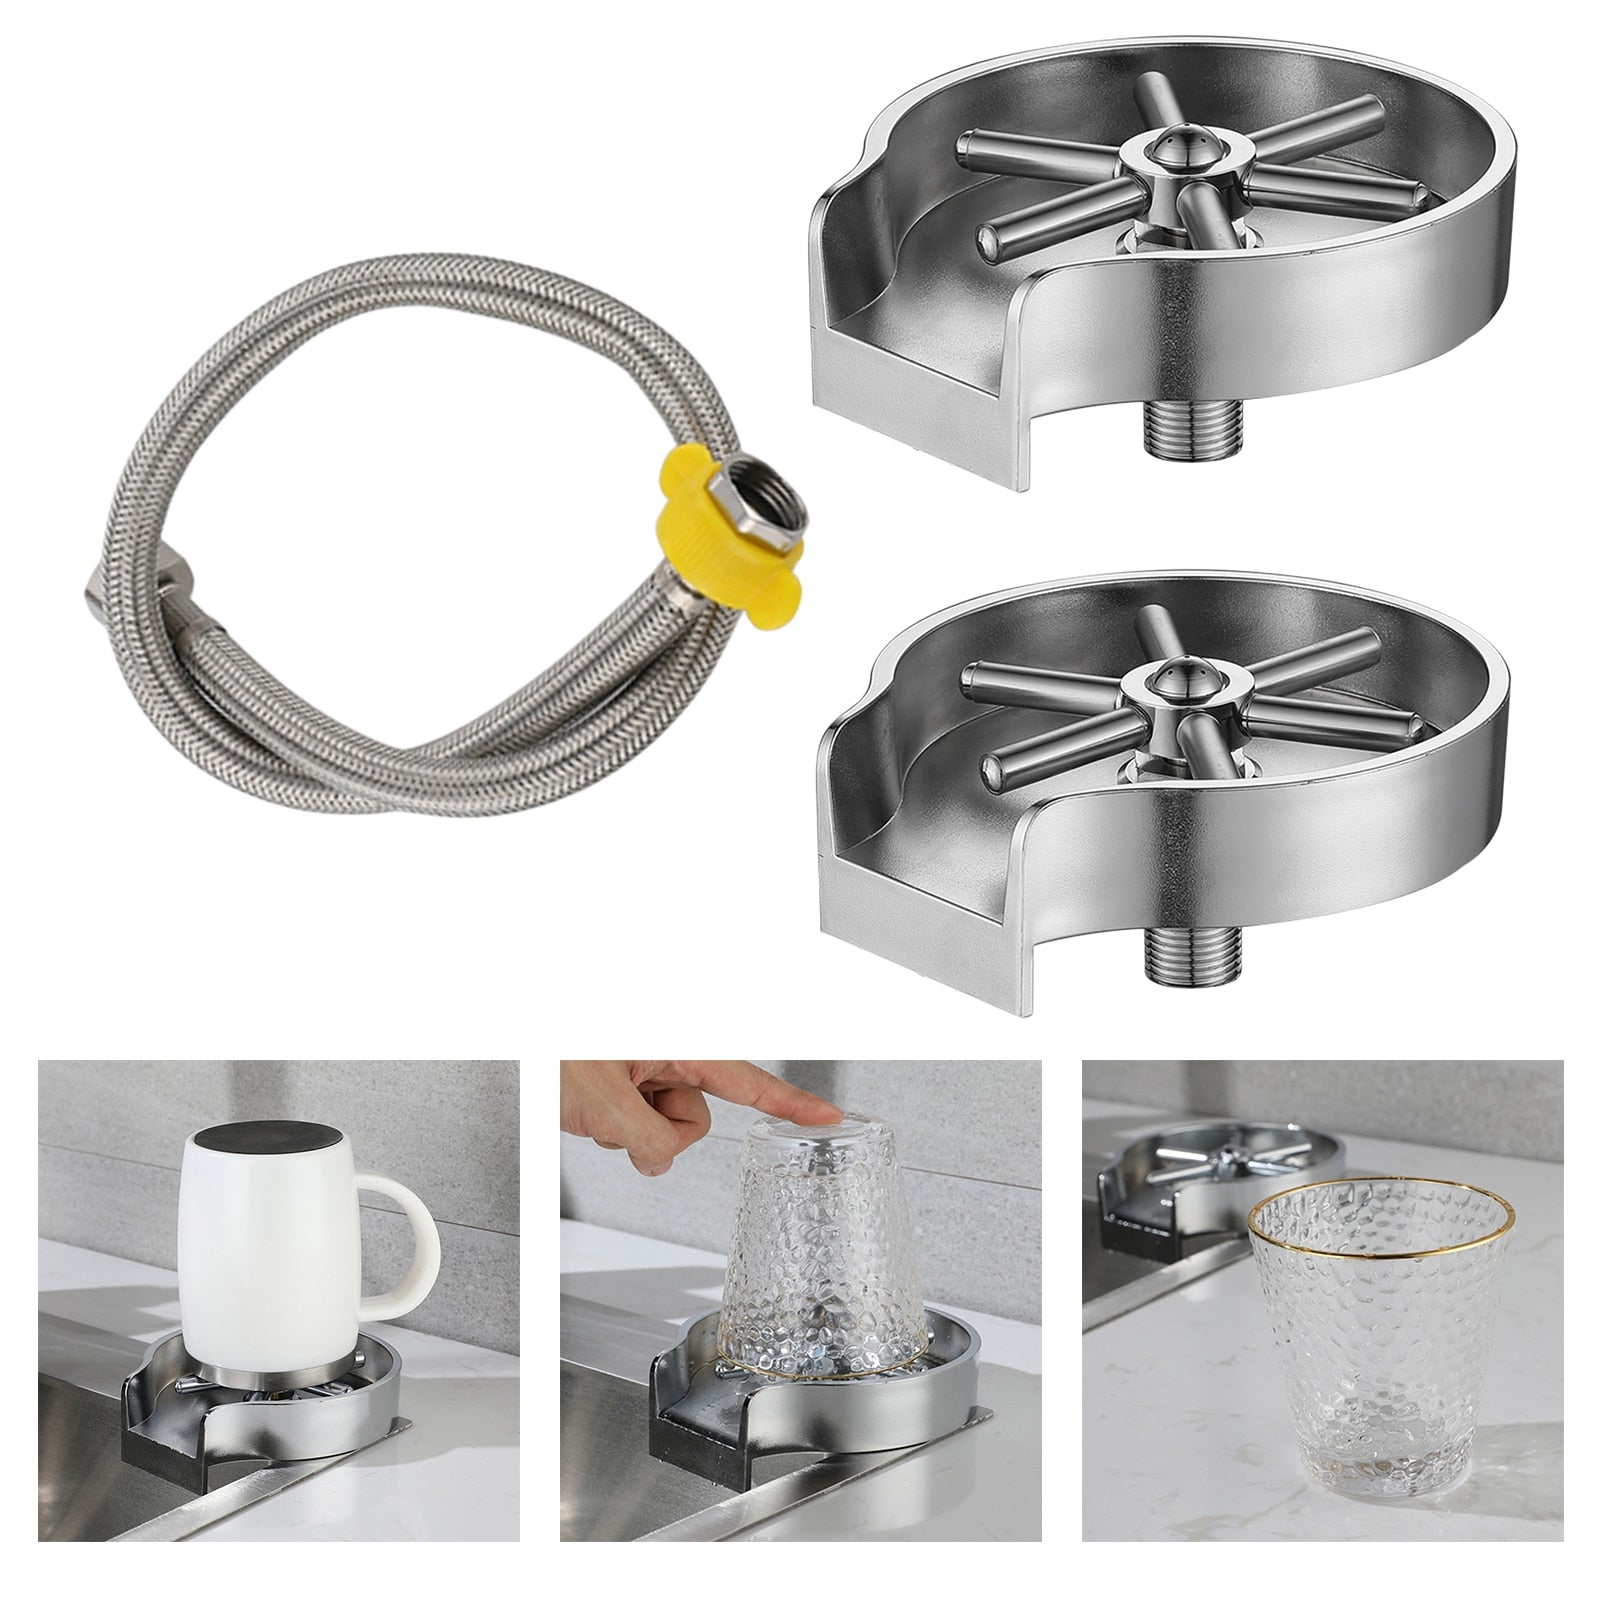 Cup Rinser for Kitchen - Stainless Steel